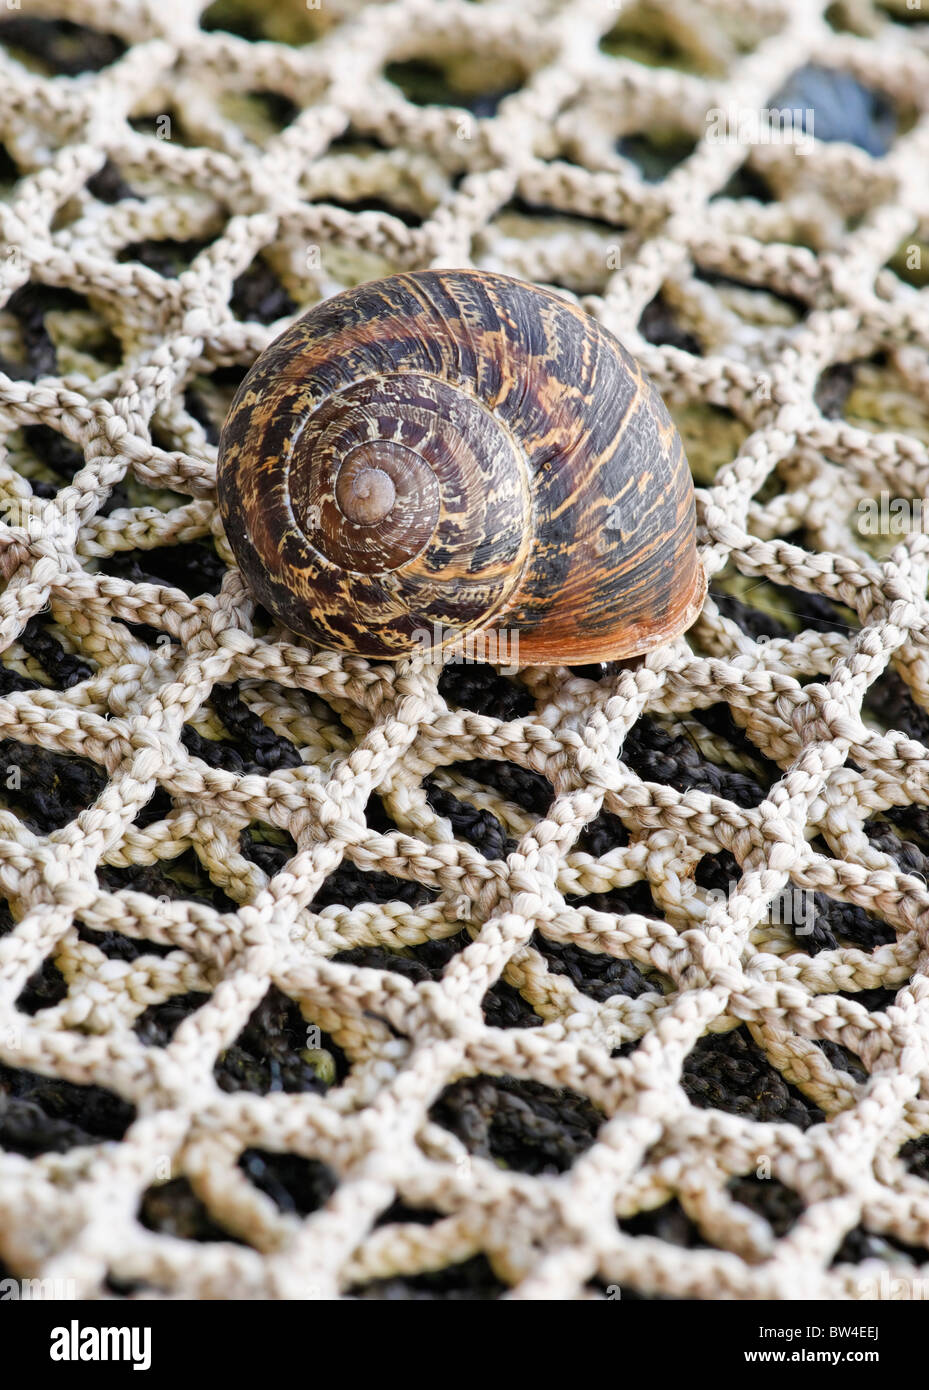 A land snail on a fishing net, with a right-handed shell. Terrestrial gastropod mollusk. Stock Photo